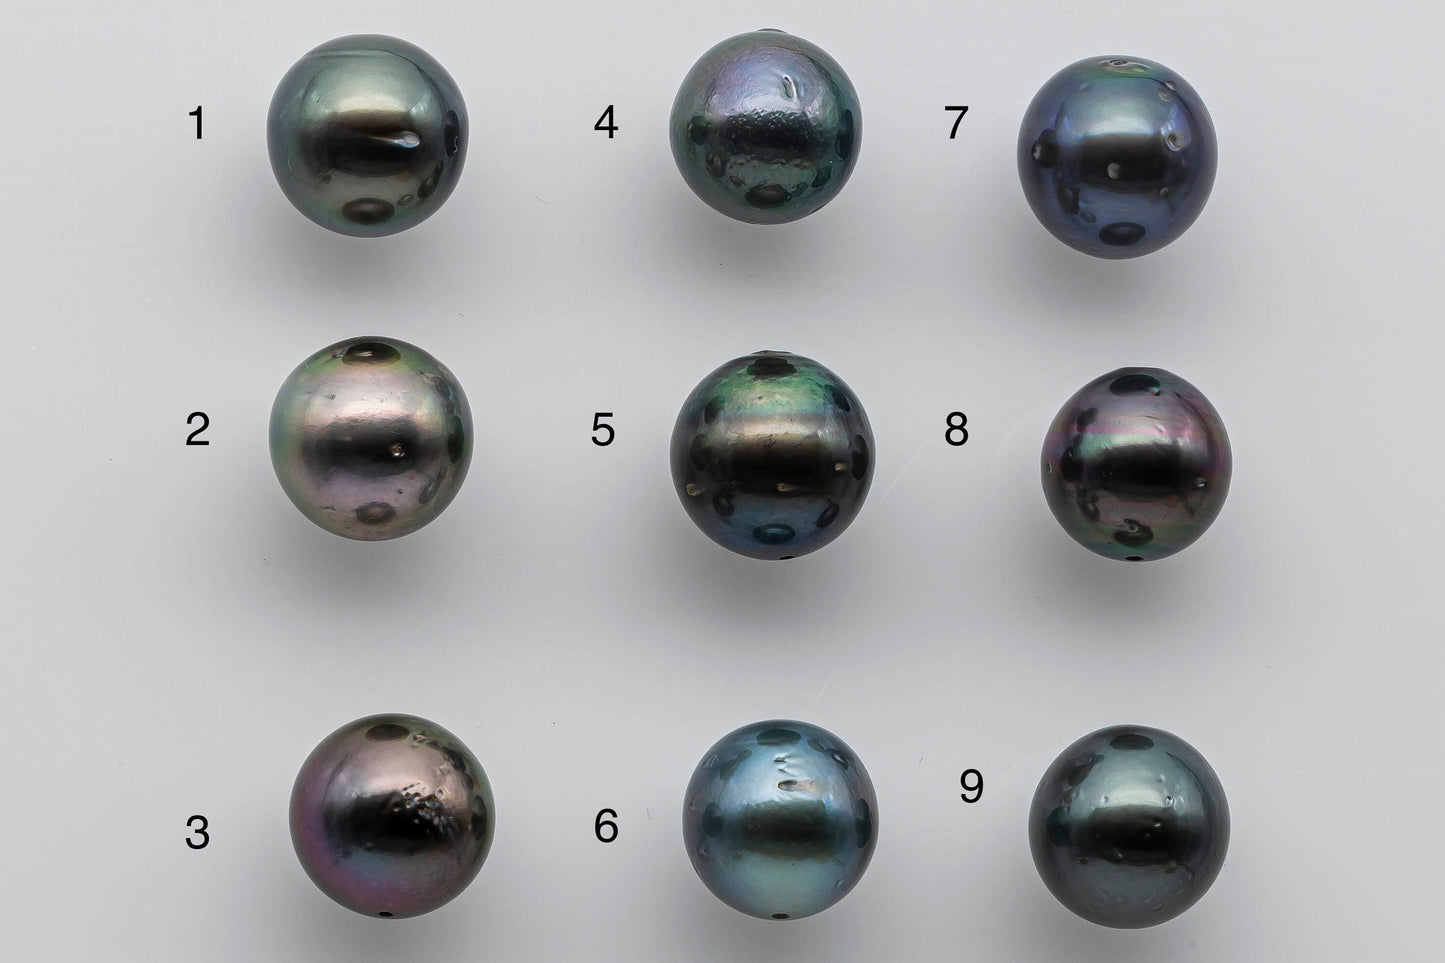 11-12mm Loose Tahitian Pearl Near Round with High Lusters and Natural Colors, Blemish and Predrilled Hole, SKU # 1397TH